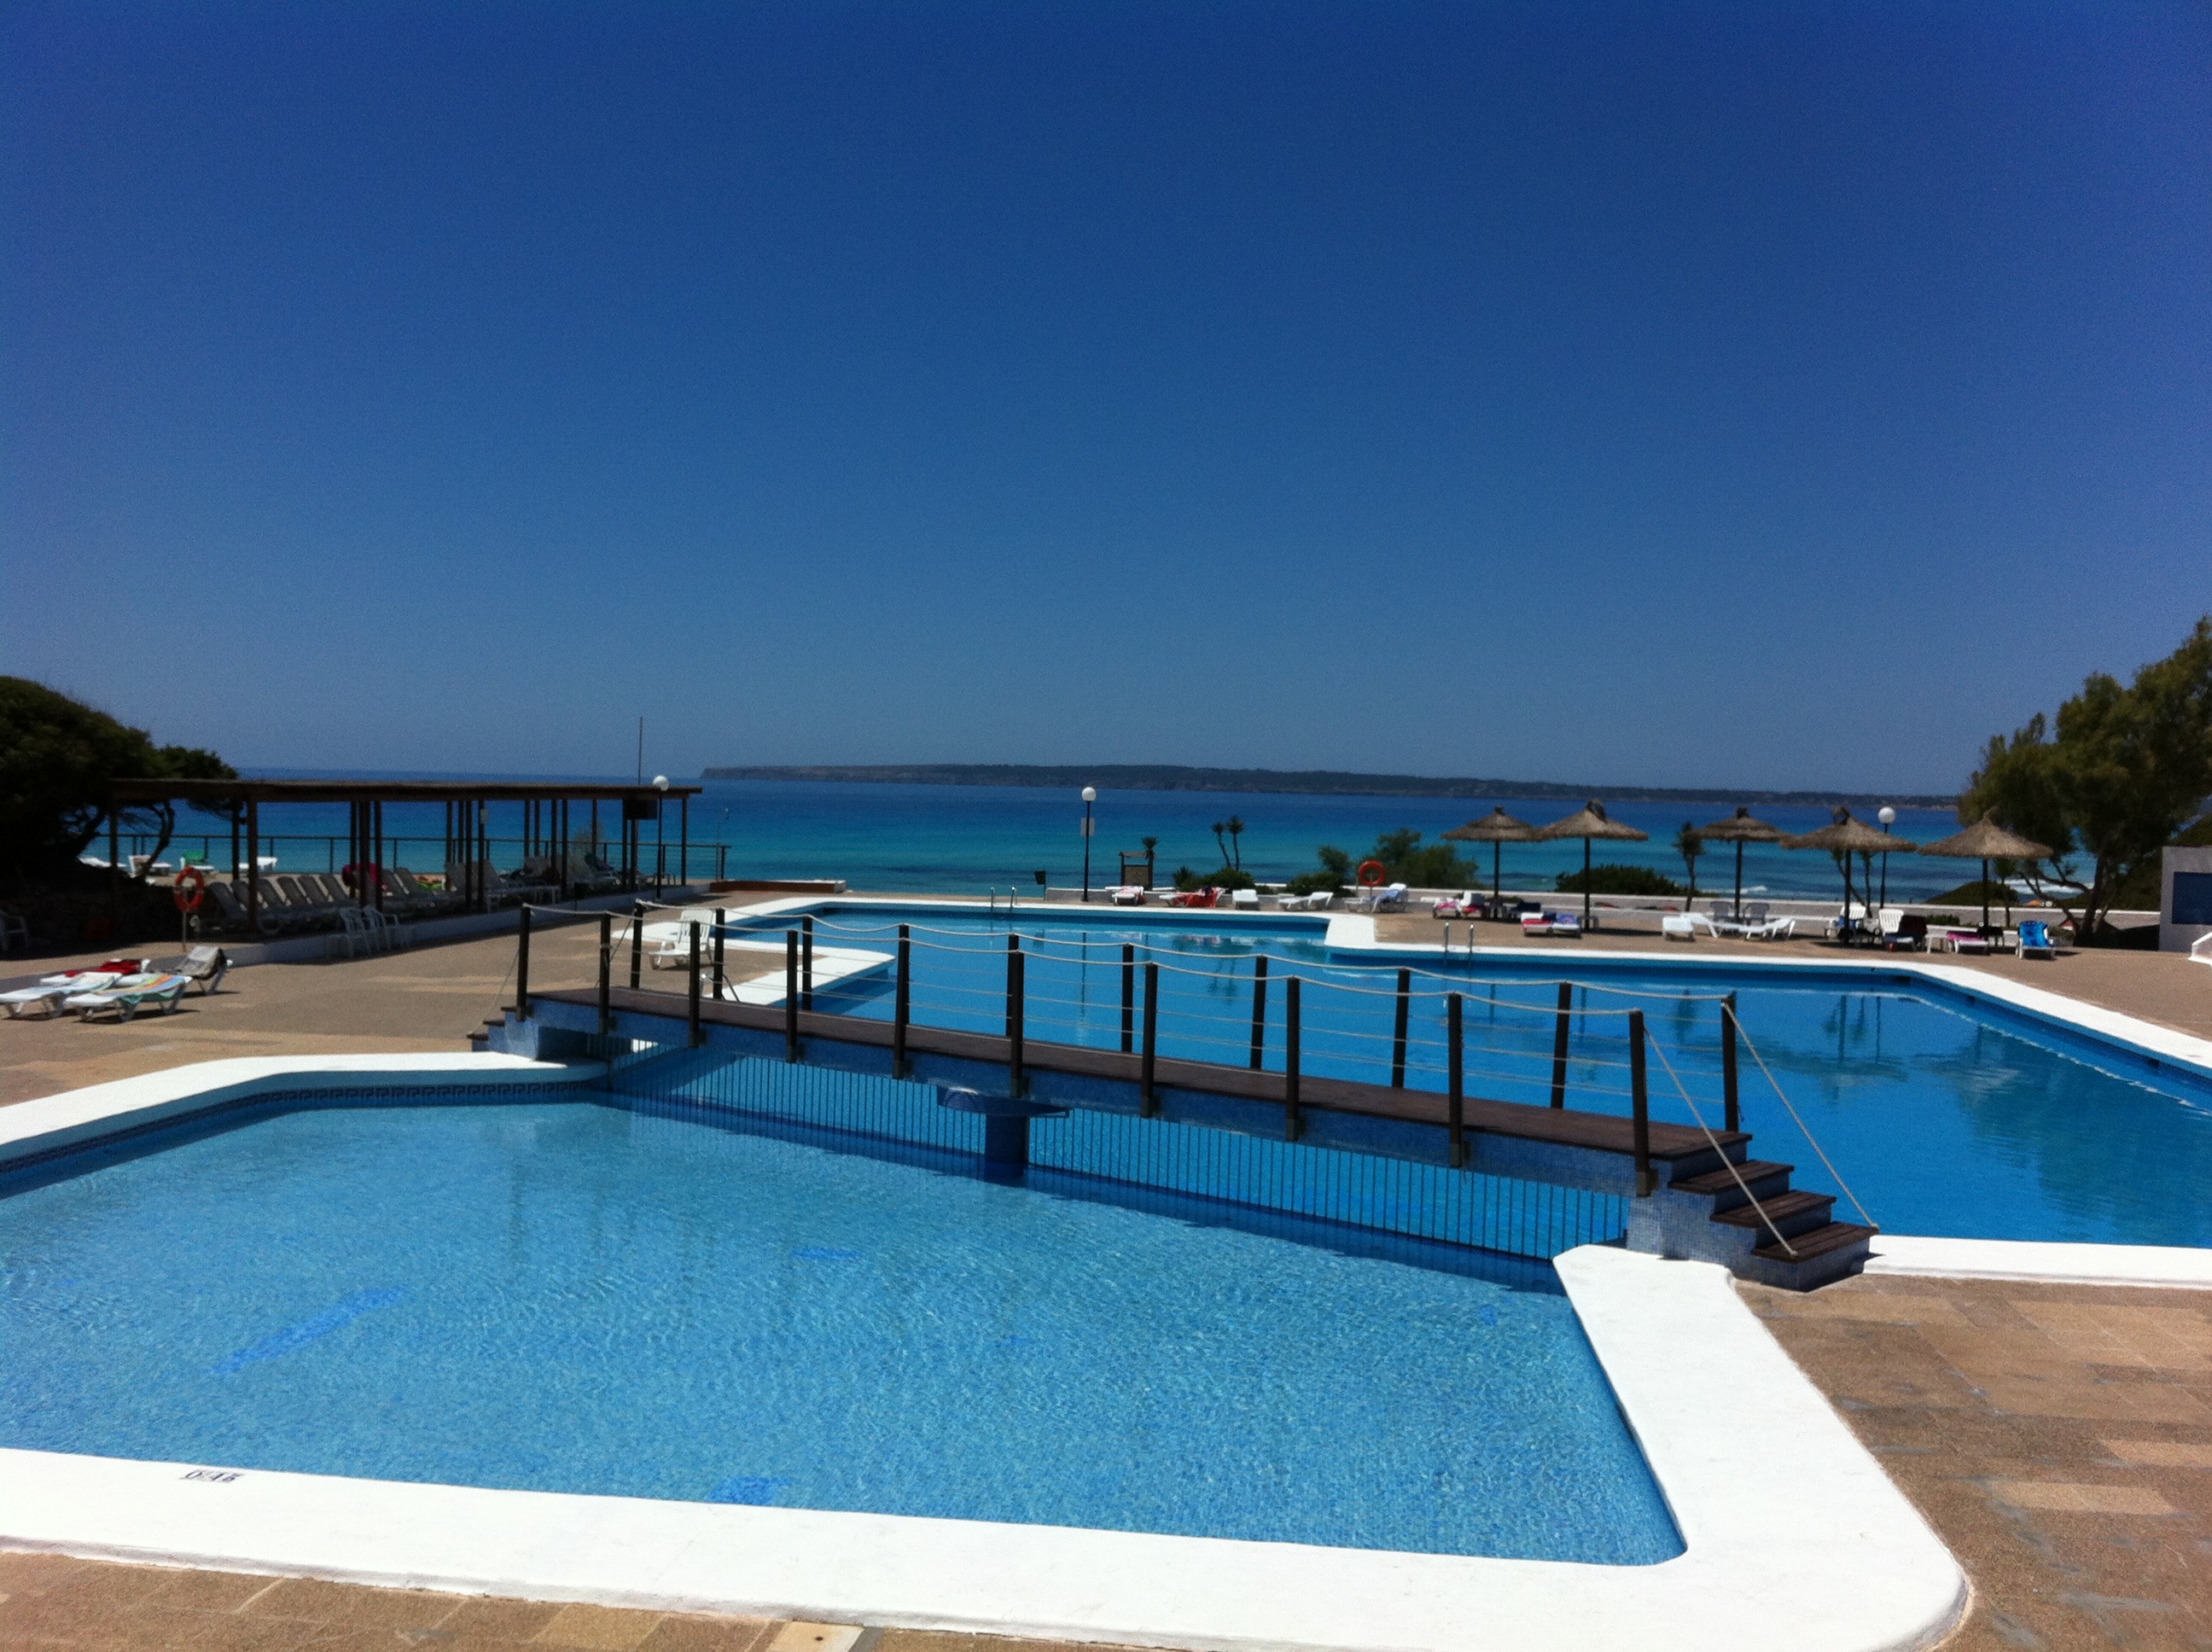 Pool and sea in Formentera